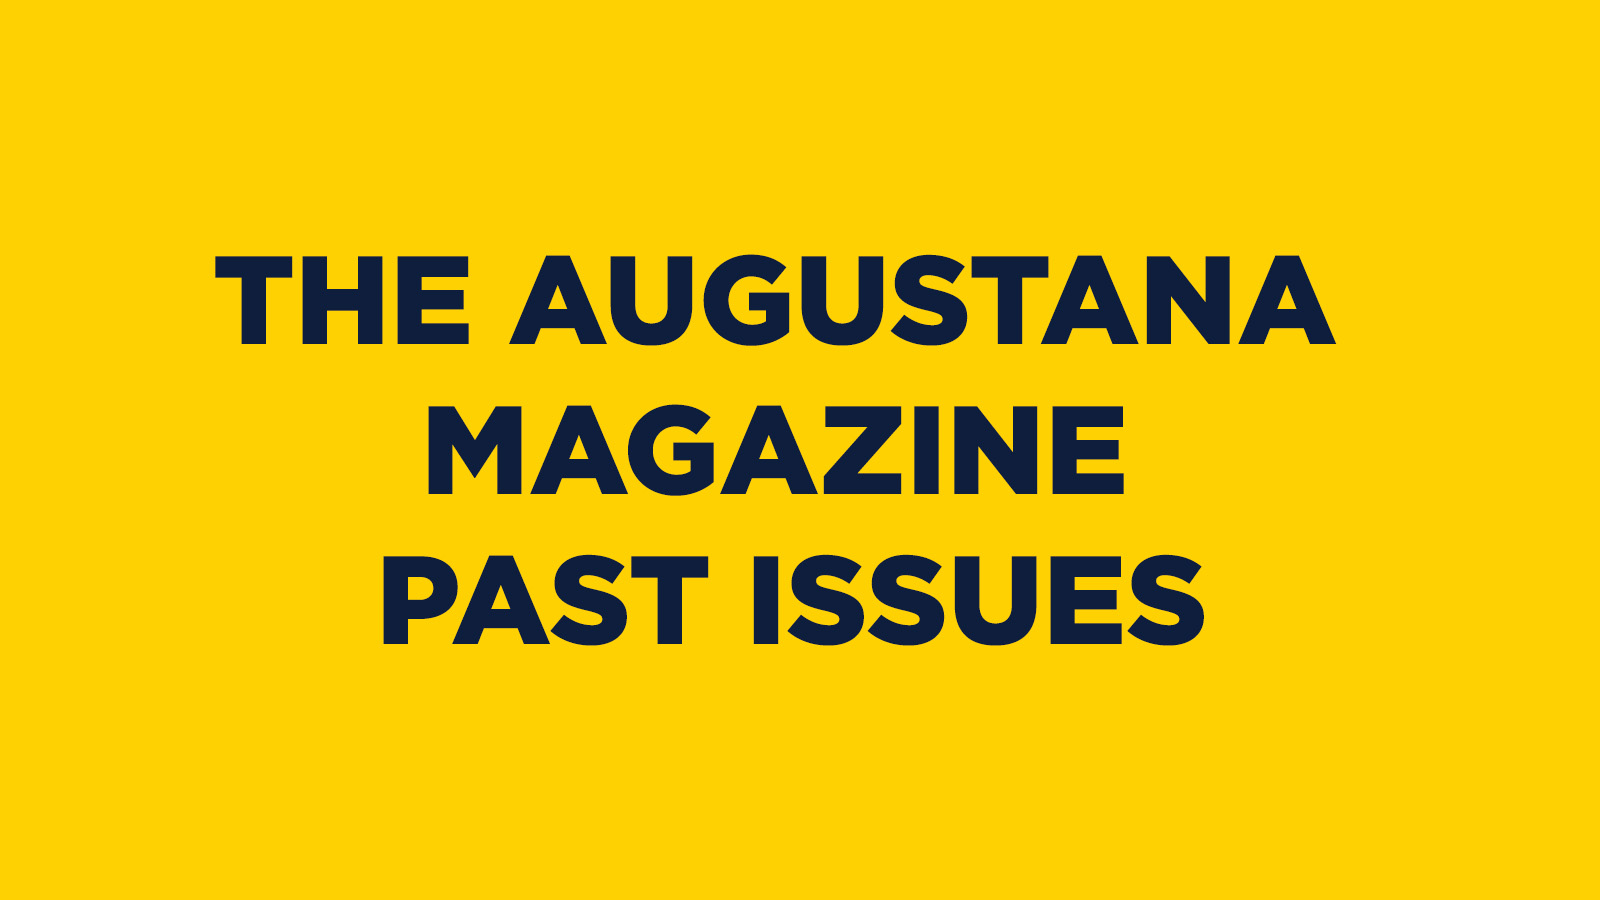 THE AUGUSTANA MAGAZINE PAST ISSUES